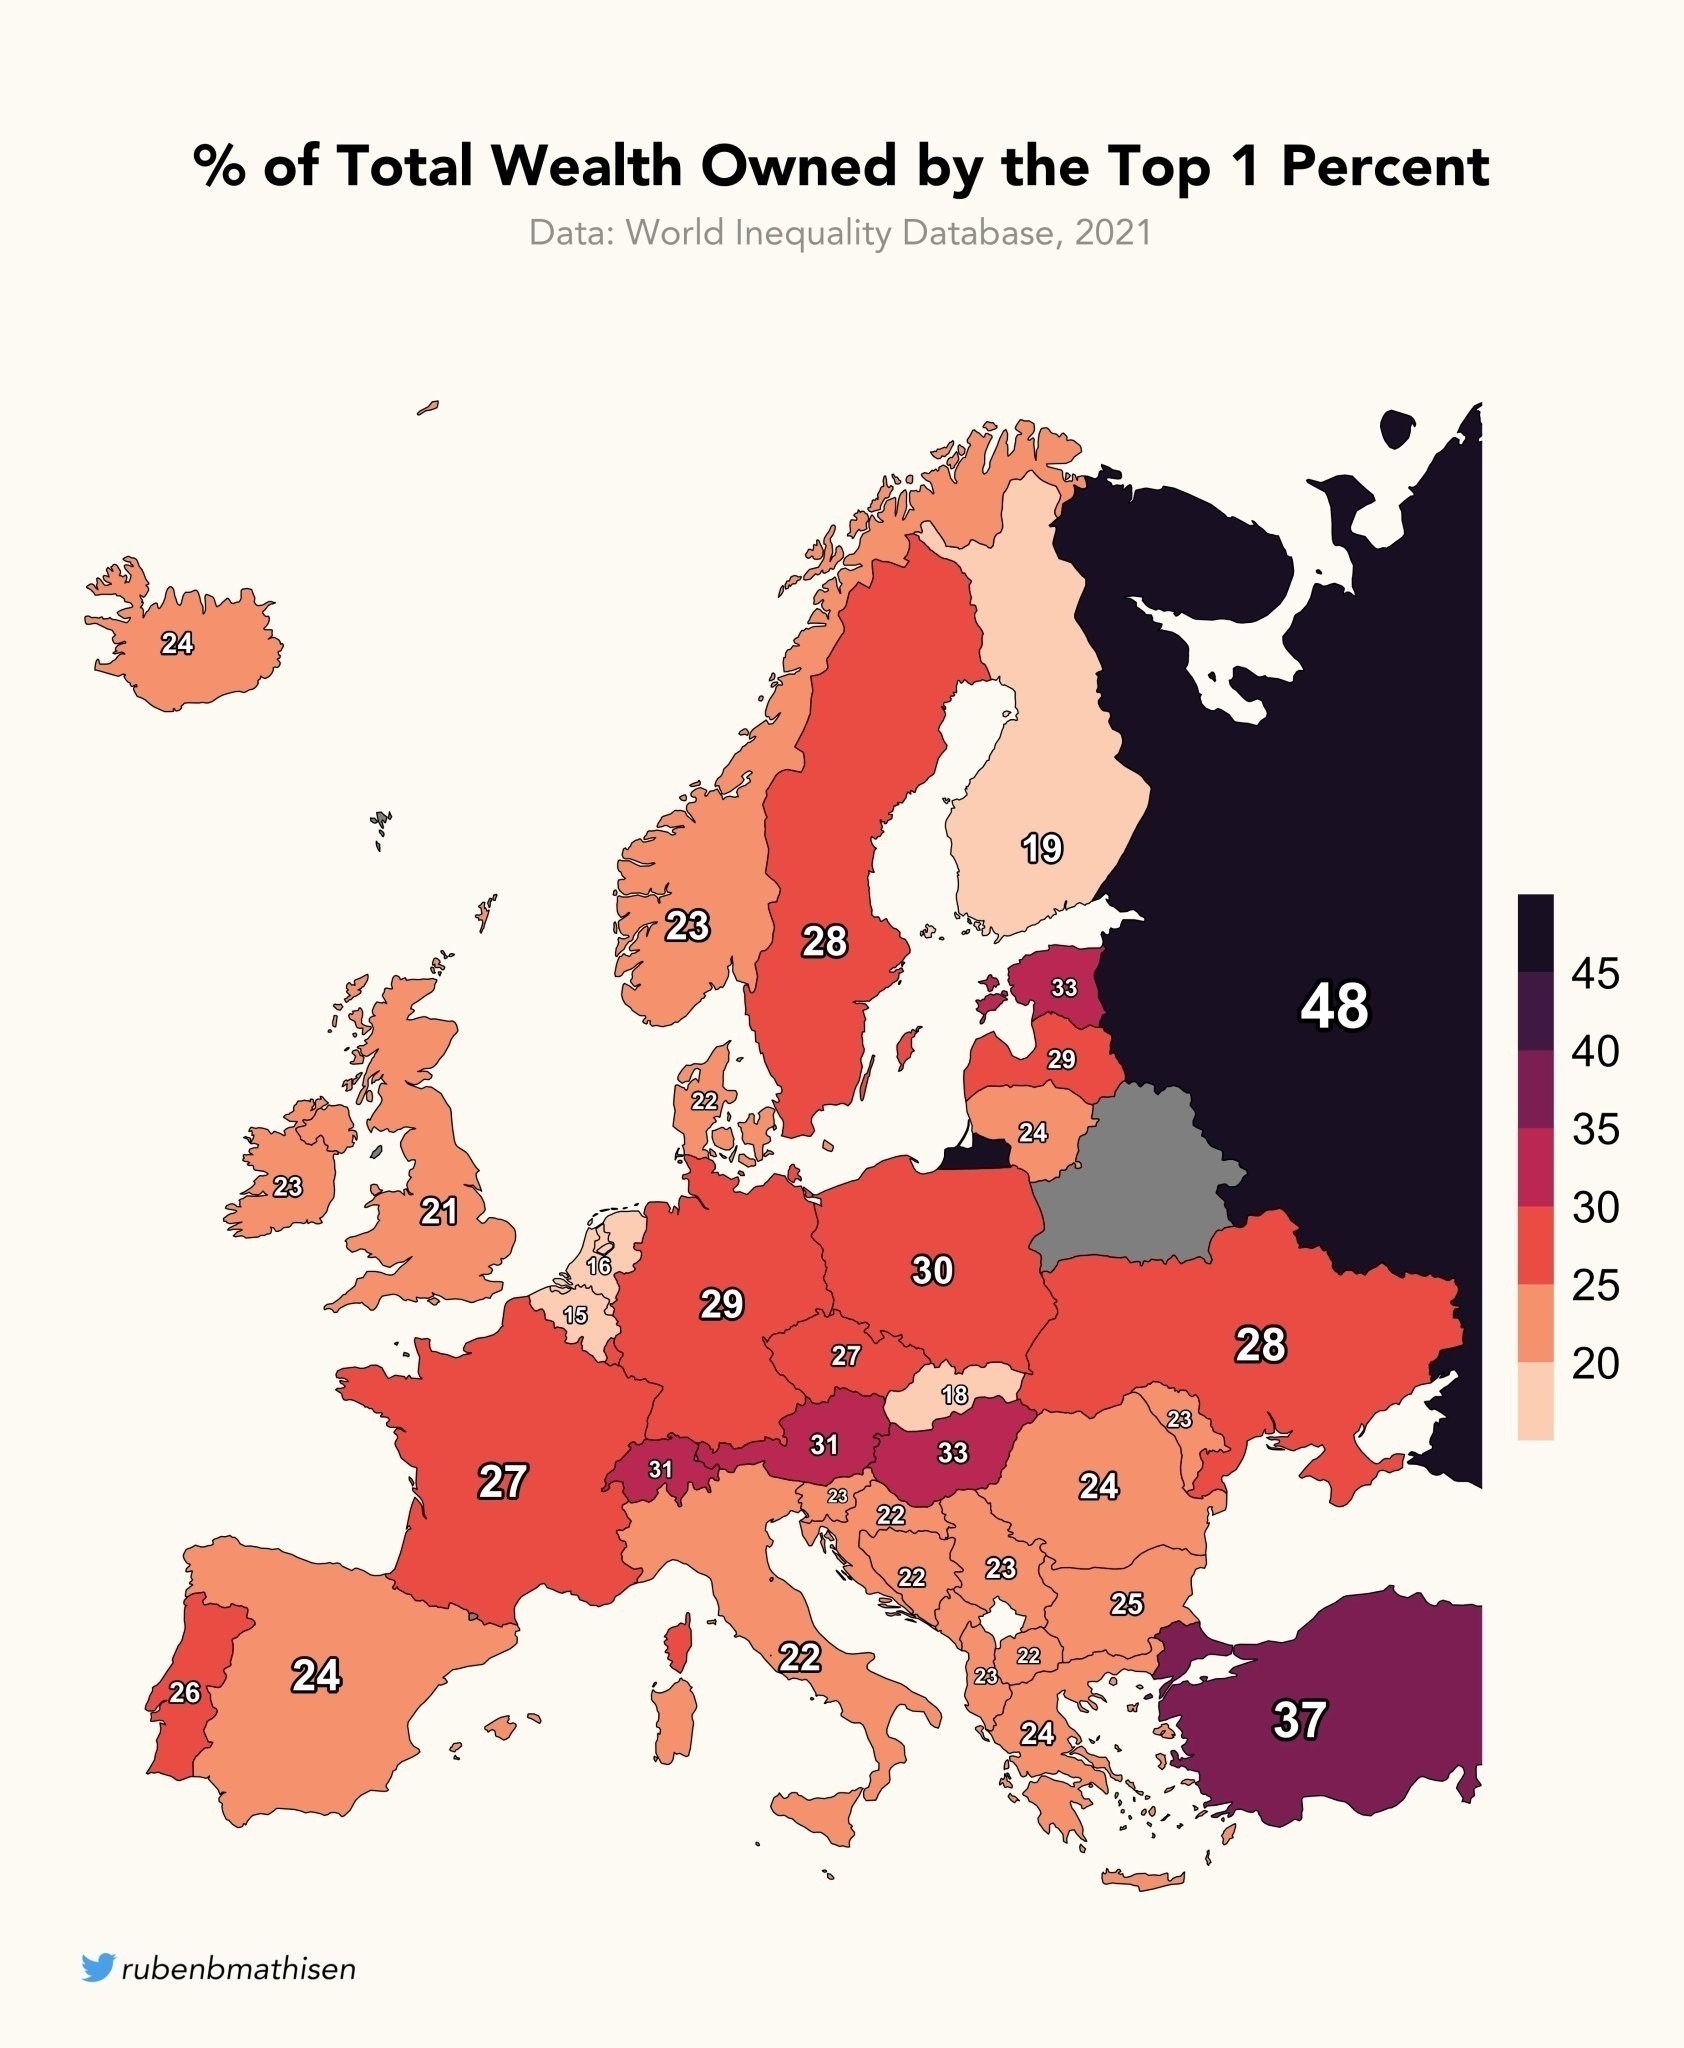 Map of Europe showing the % of Total Wealth Owned by the Top 1 Percent for each country. Some highlights include: UK = 21%, France = 27%, Germany = 29%, Turkey = 37%. Russia = 48% is the highest, and Belgium the lowest = 15%